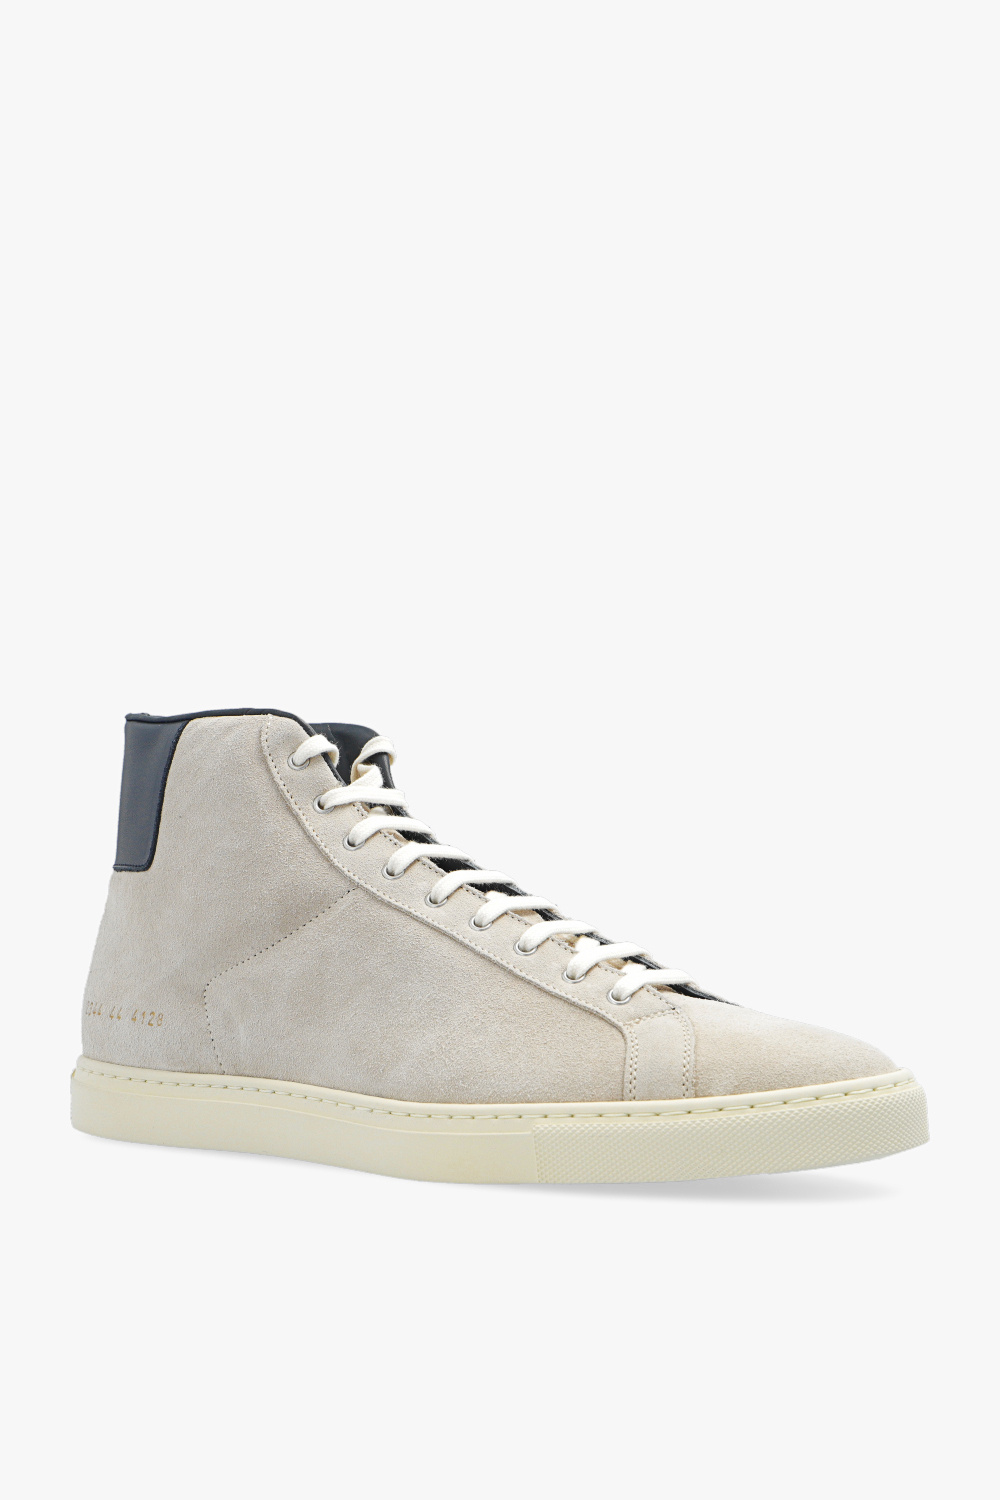 Common Projects ‘Retro High’ sneakers